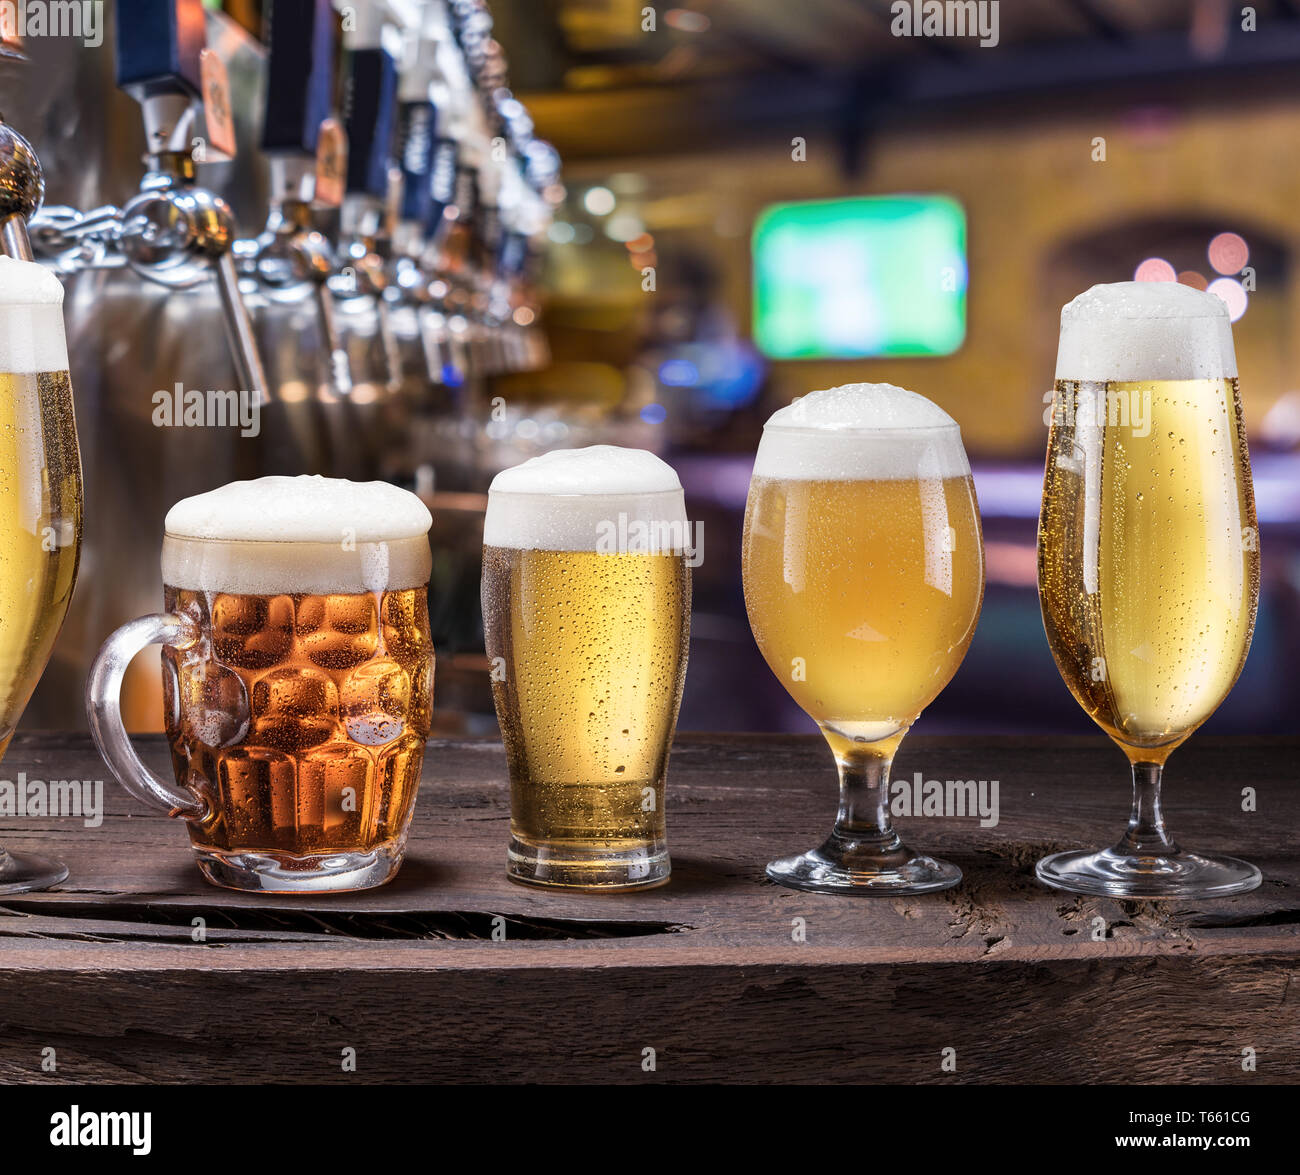 Chilled mugs and glasses of beer on the old wooden table. Pub interior and bar counter with beer taps at the background. Assortment of beer. Stock Photo